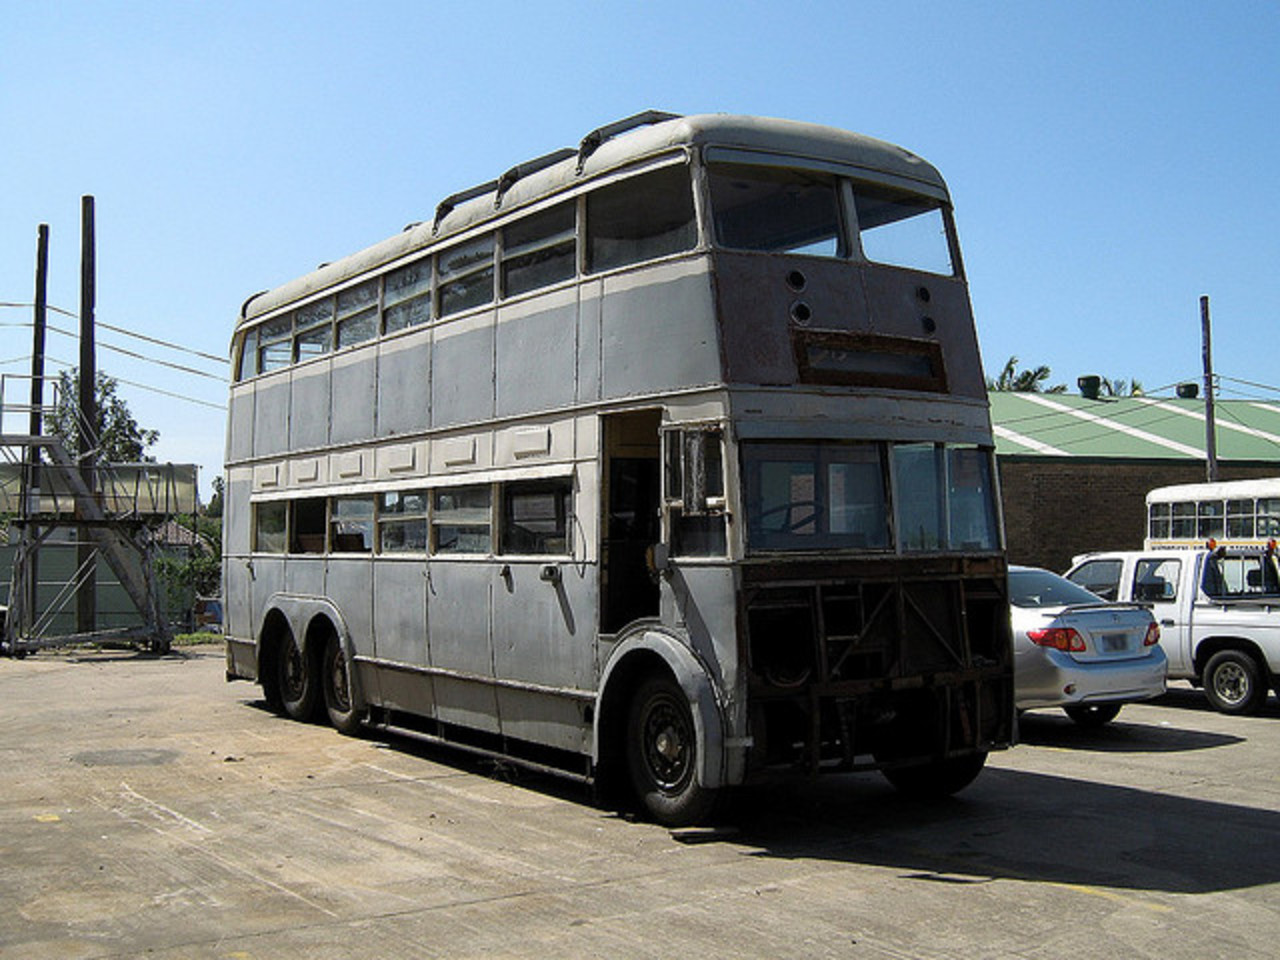 1942 - D D Leyland Trolley Bus | Flickr - Photo Sharing!